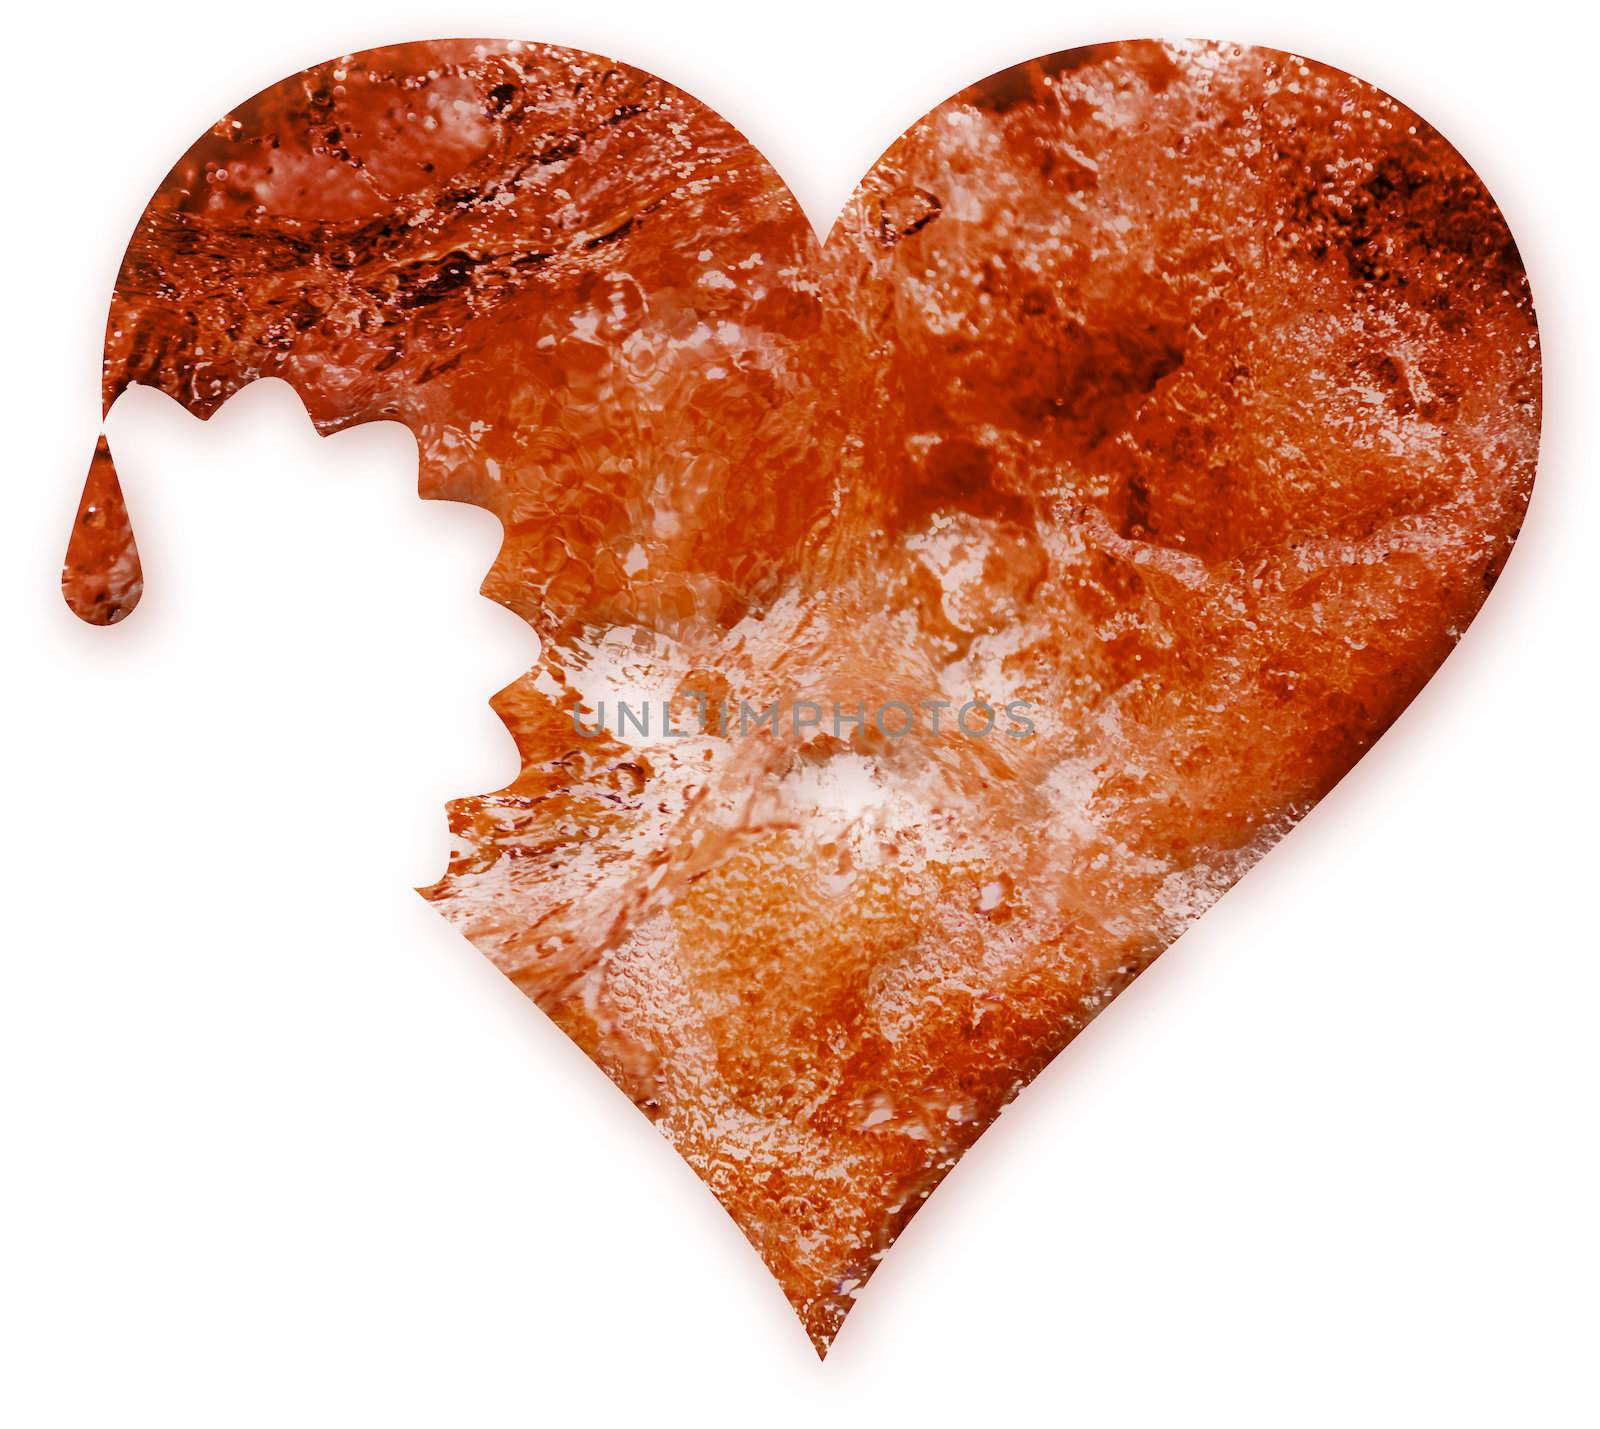 The damaged red heart on a white background